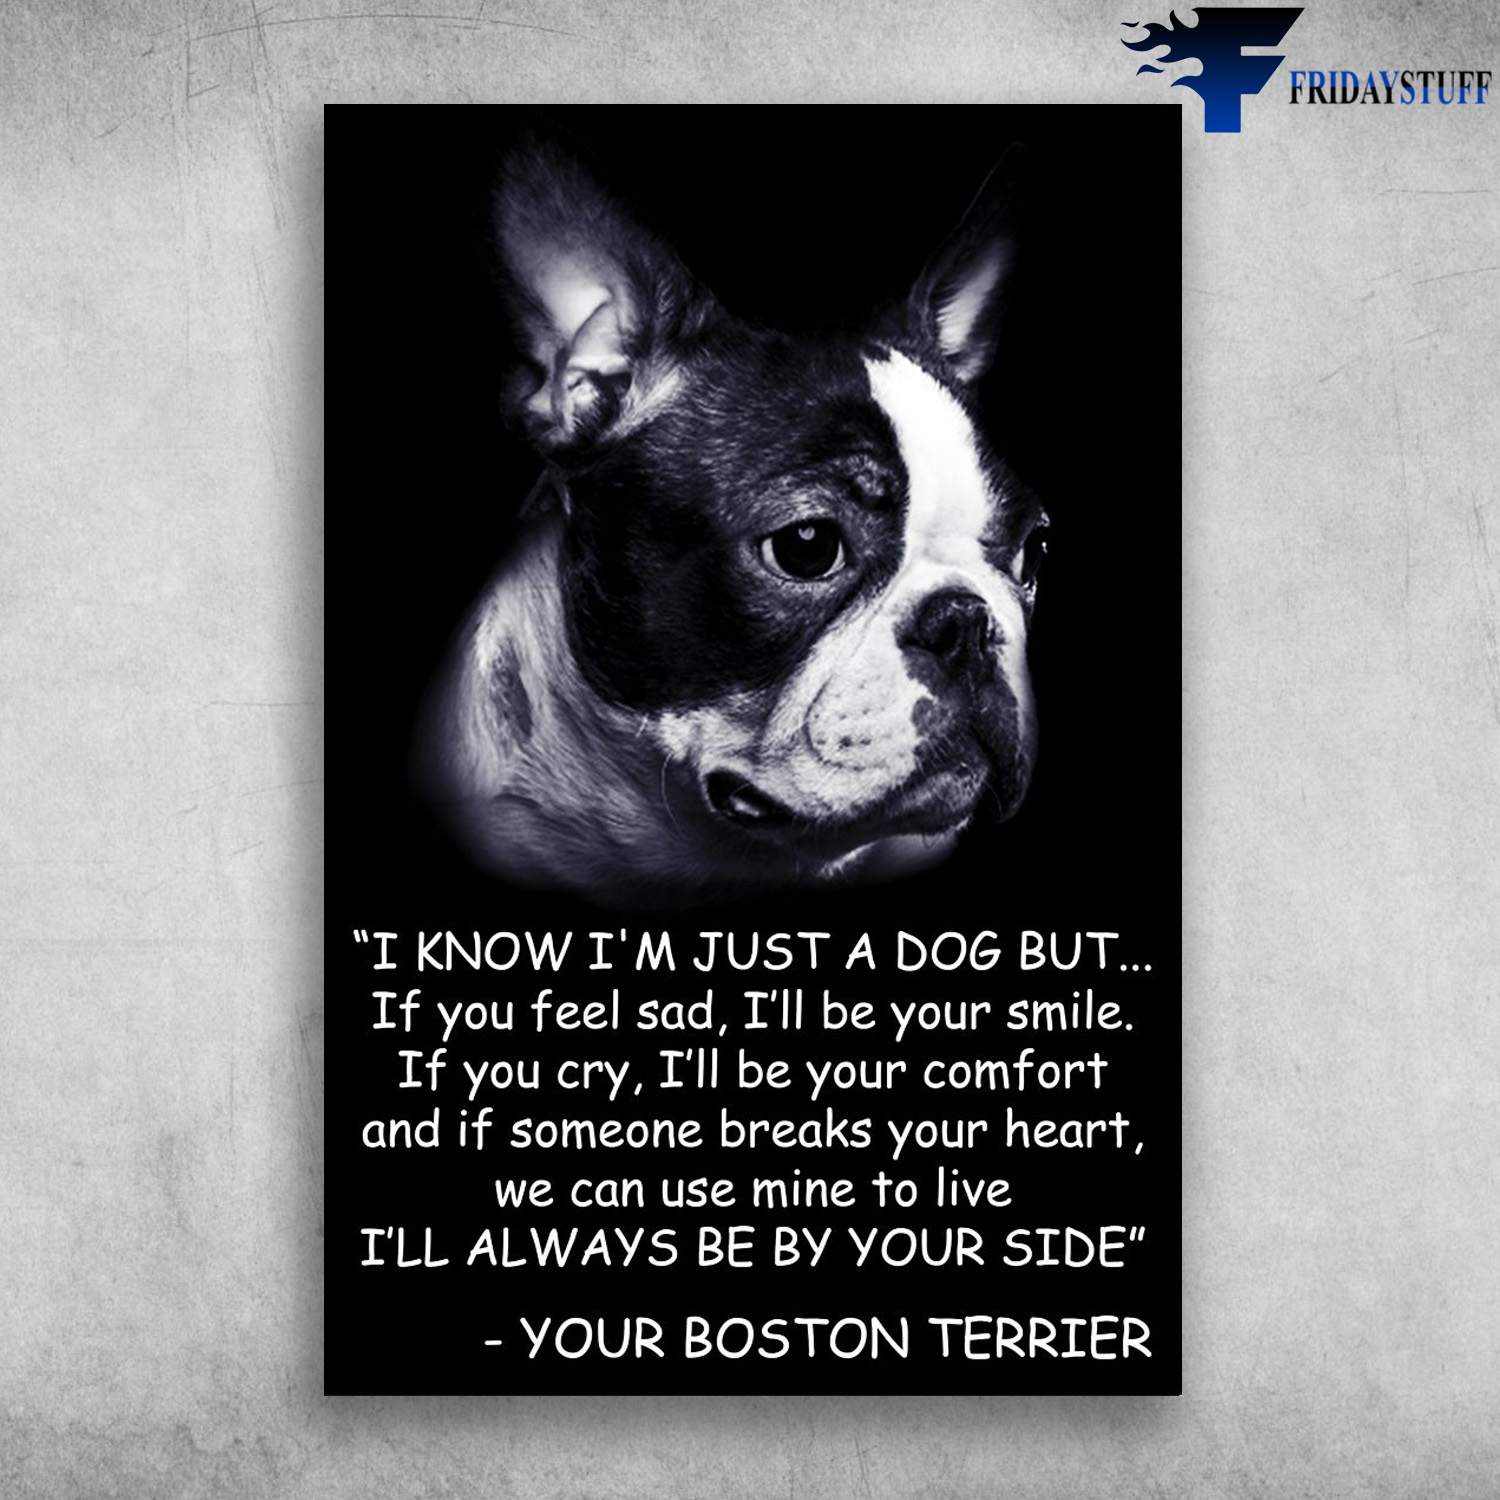 Boston Terrier - I Know I'm Just A Dog But, If You Feel Sad, I'll Be Your Smile, If You Cry, I'll Be Your Comfort And If Someone Breaks Your Heart, We Can Use Mine To Live, We Can Use Mine To Live, I'll Always Be By Your Side, Your Boston Terrier